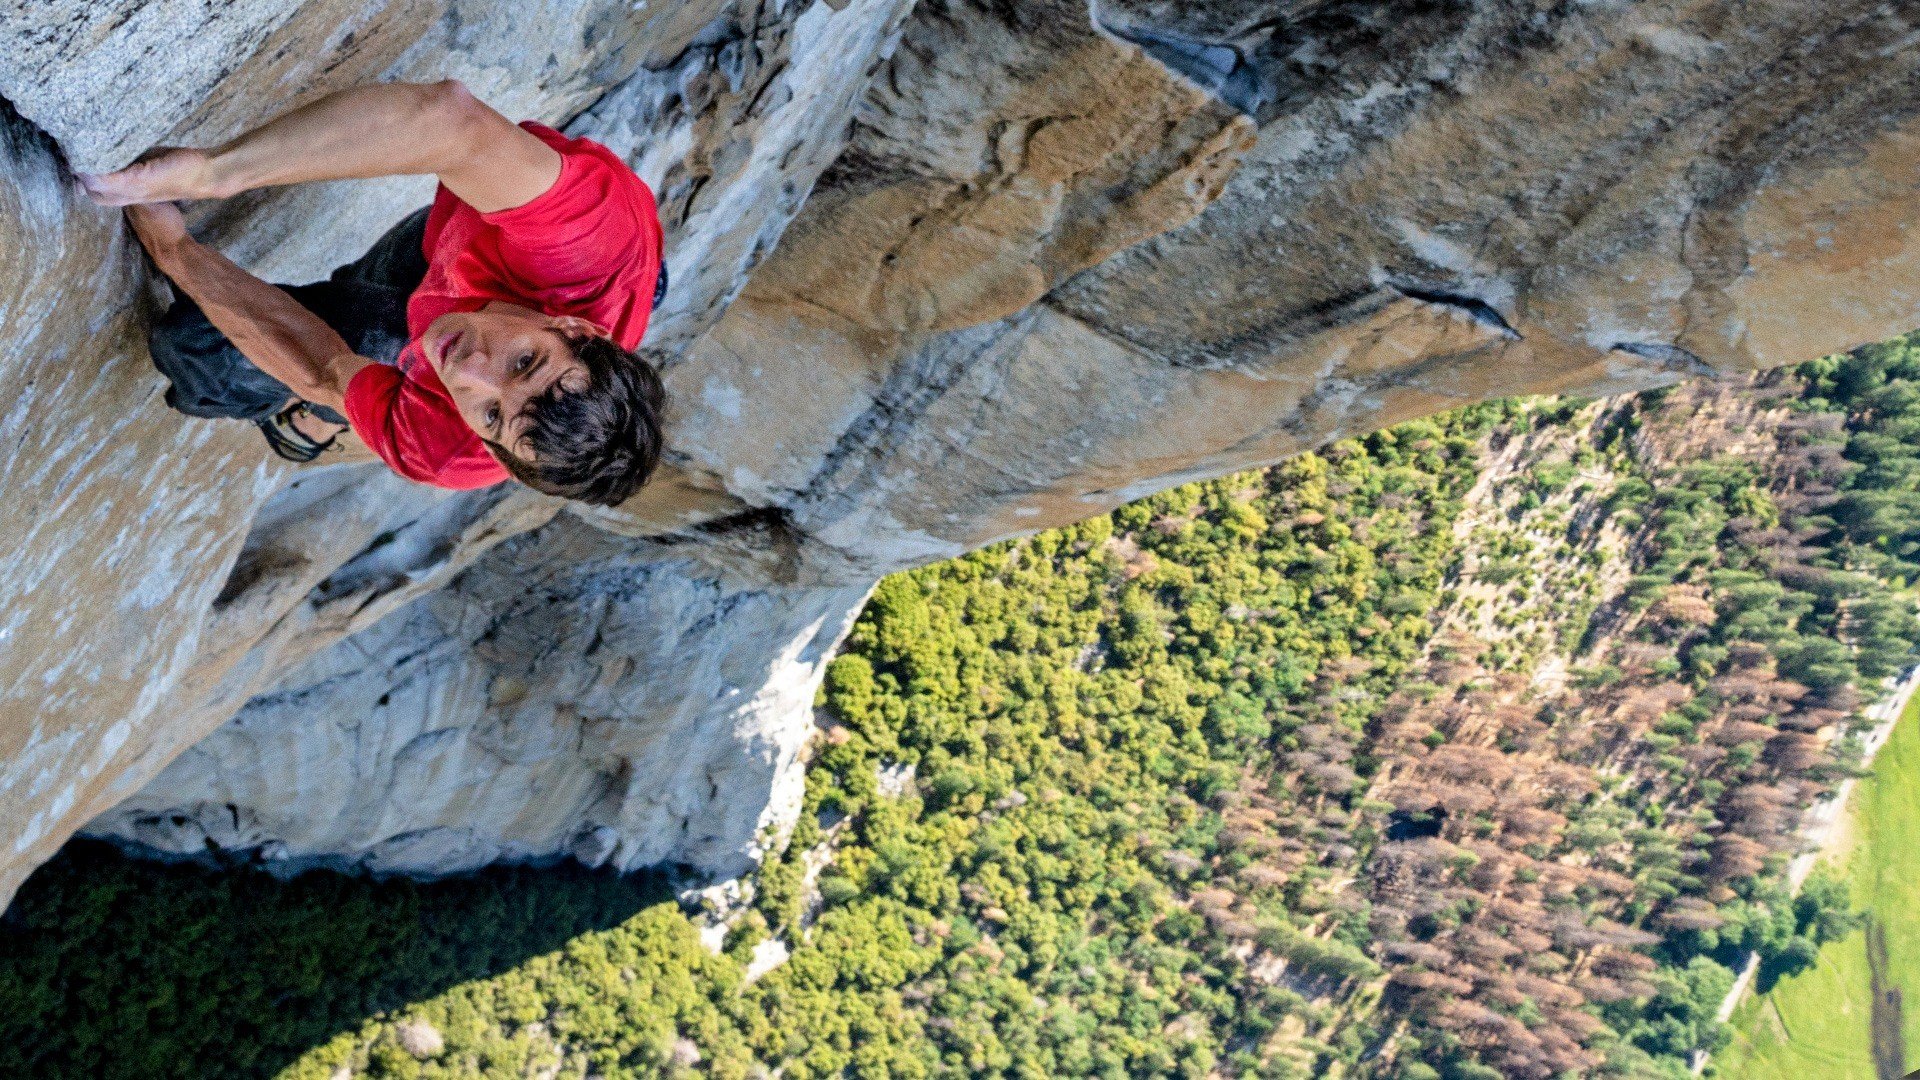 POSTPONED: Film for Thought: FREE SOLO